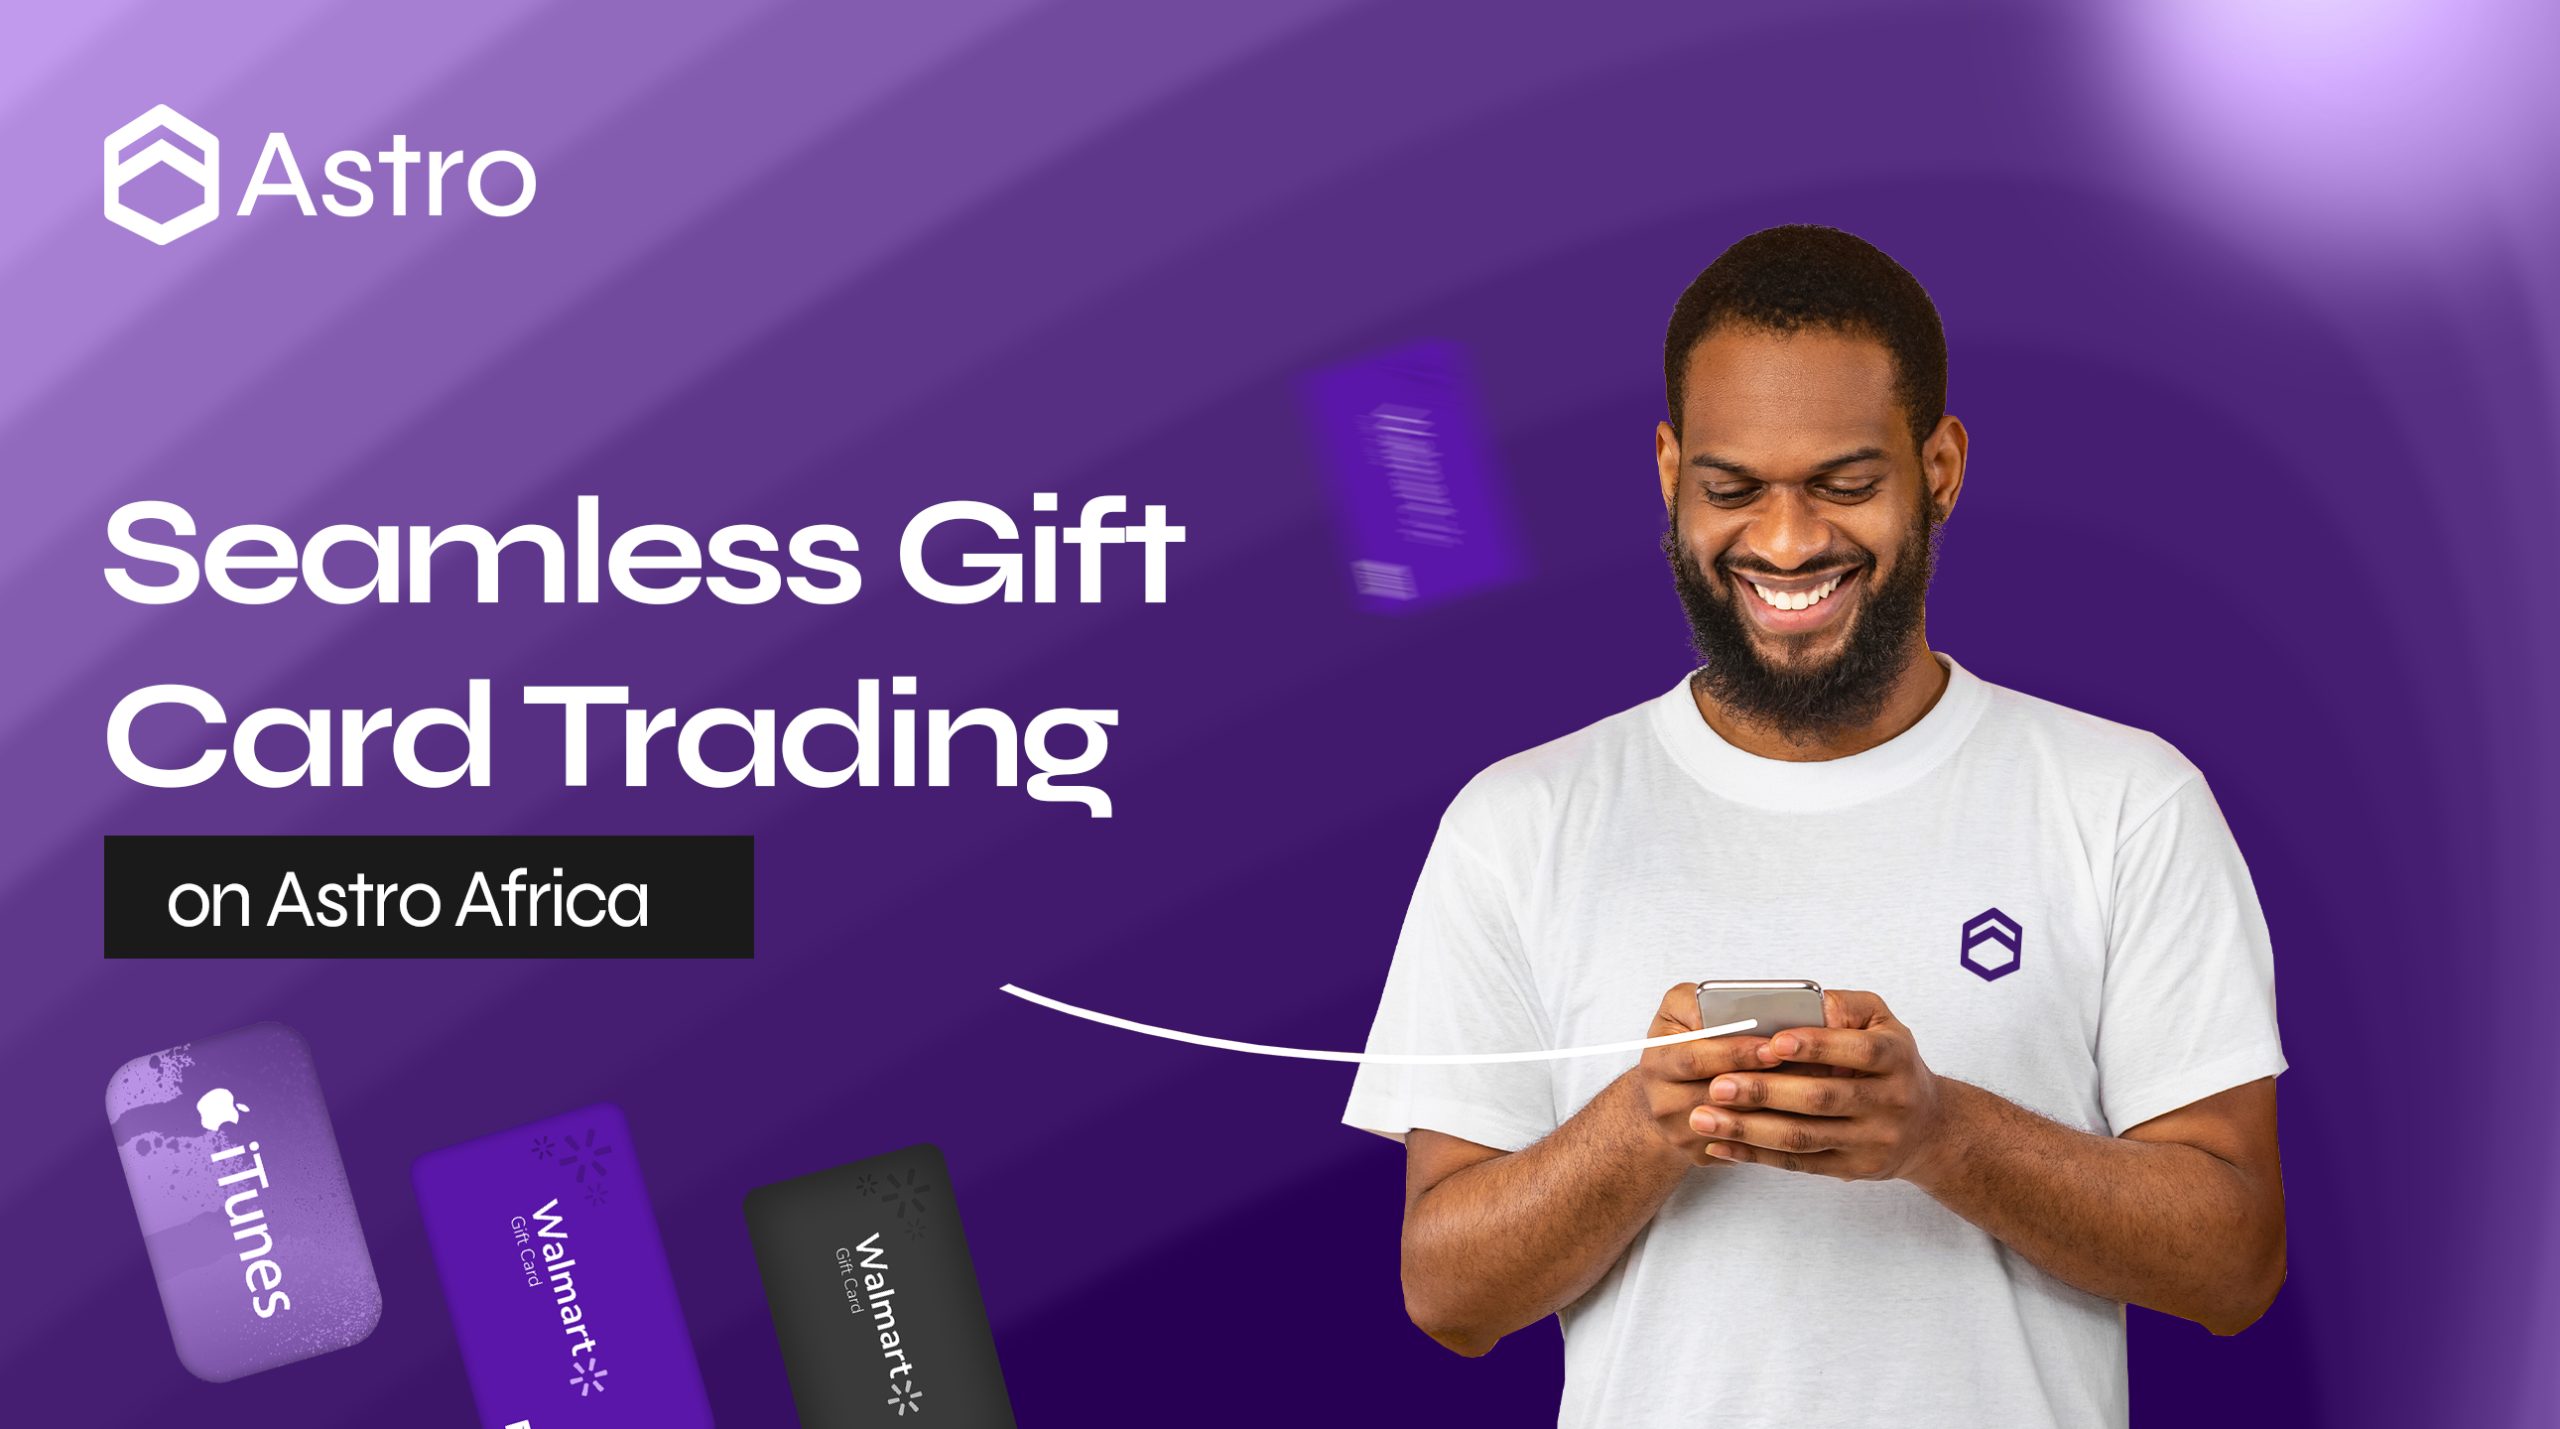 How to trade on Astro Africa App